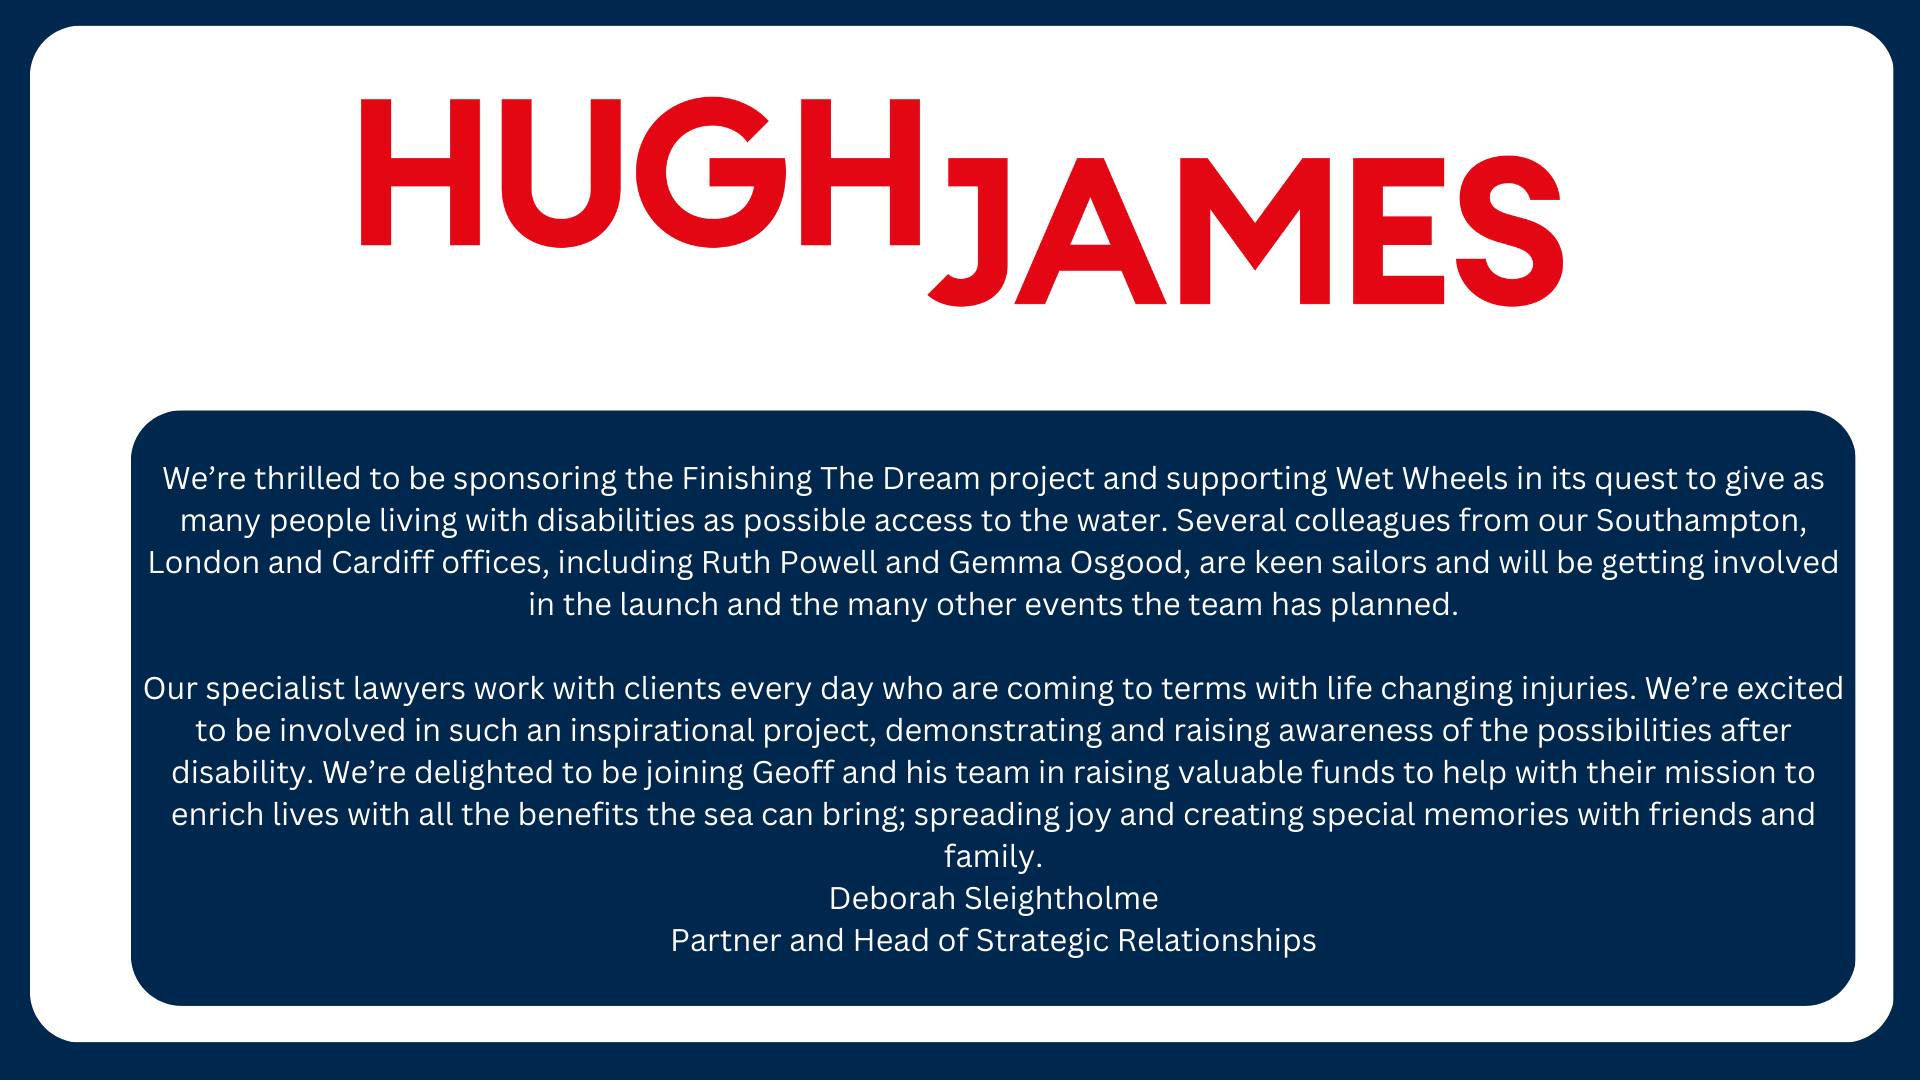 Hugh James Logo and words about how they support Finishing The Dream